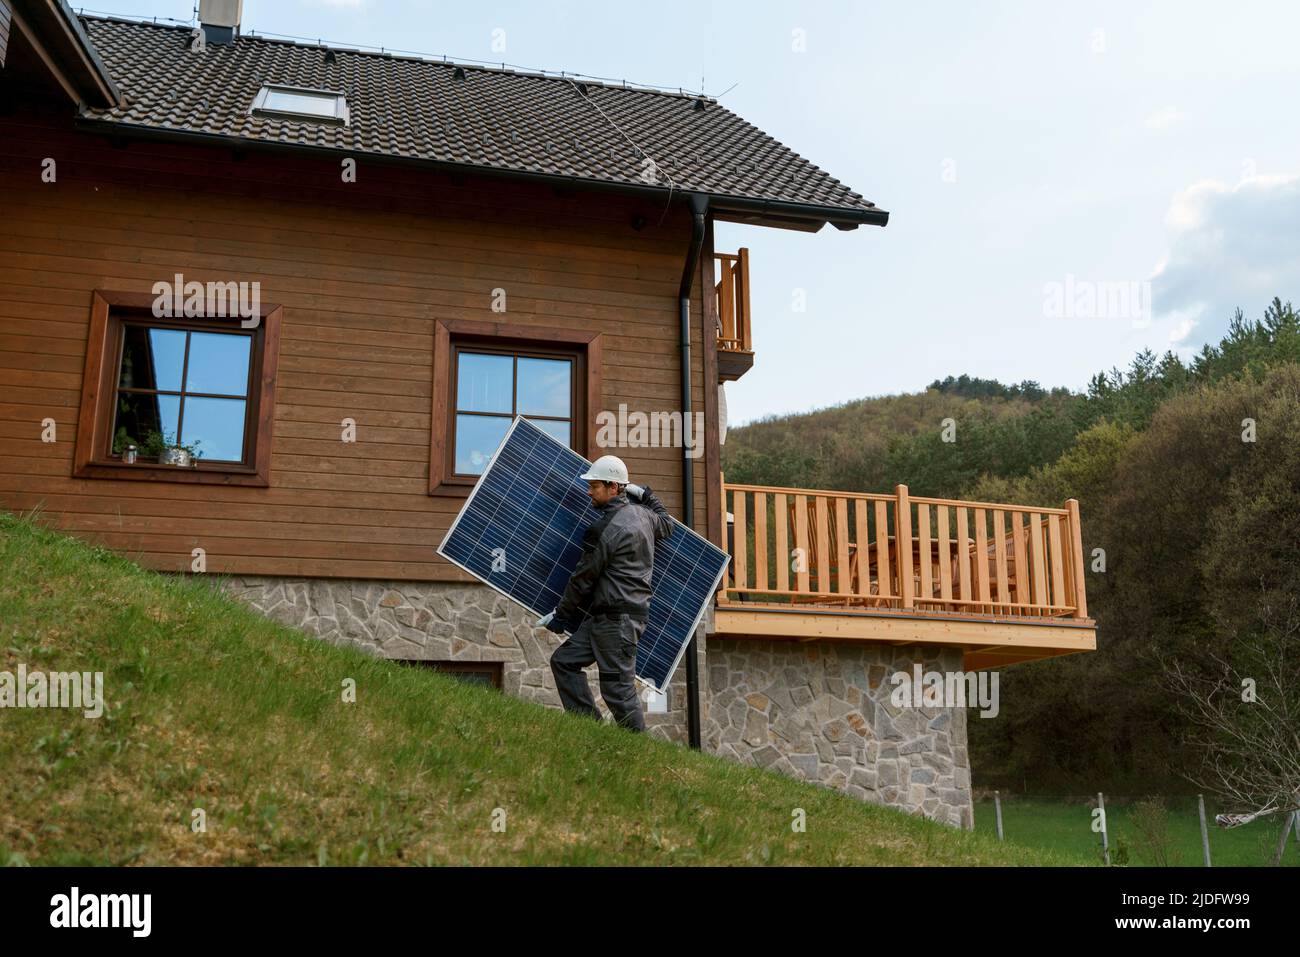 Man worker carrying solar panel for installing solar modul system on house. Stock Photo